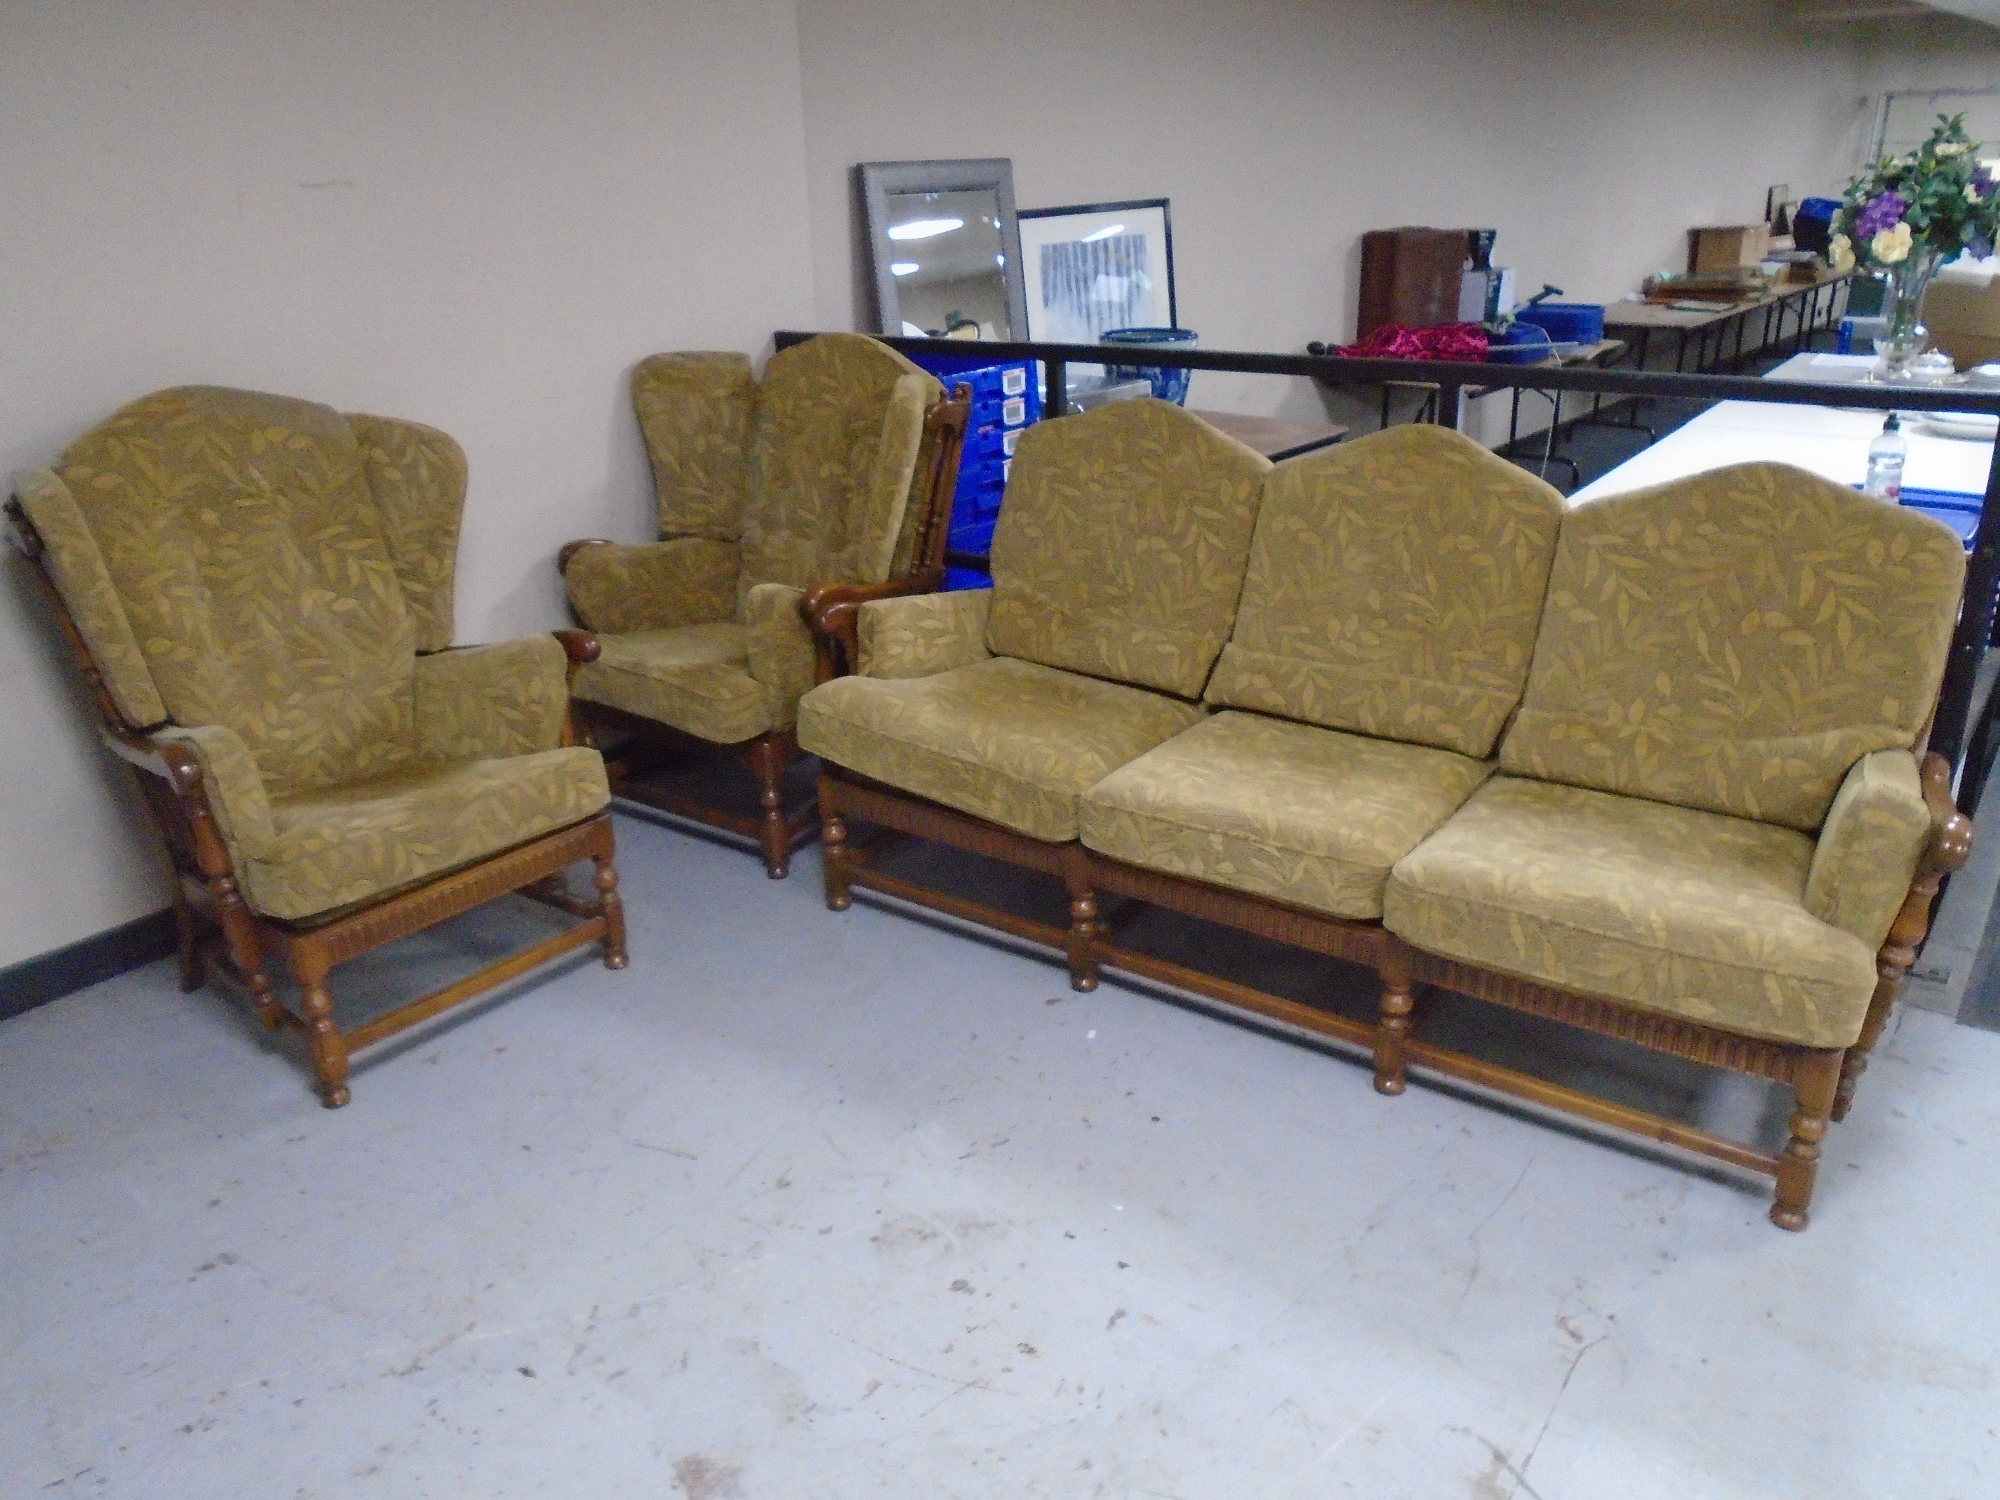 An Ercol elm and beech wood framed three piece lounge suite comprising of a three seater settee and